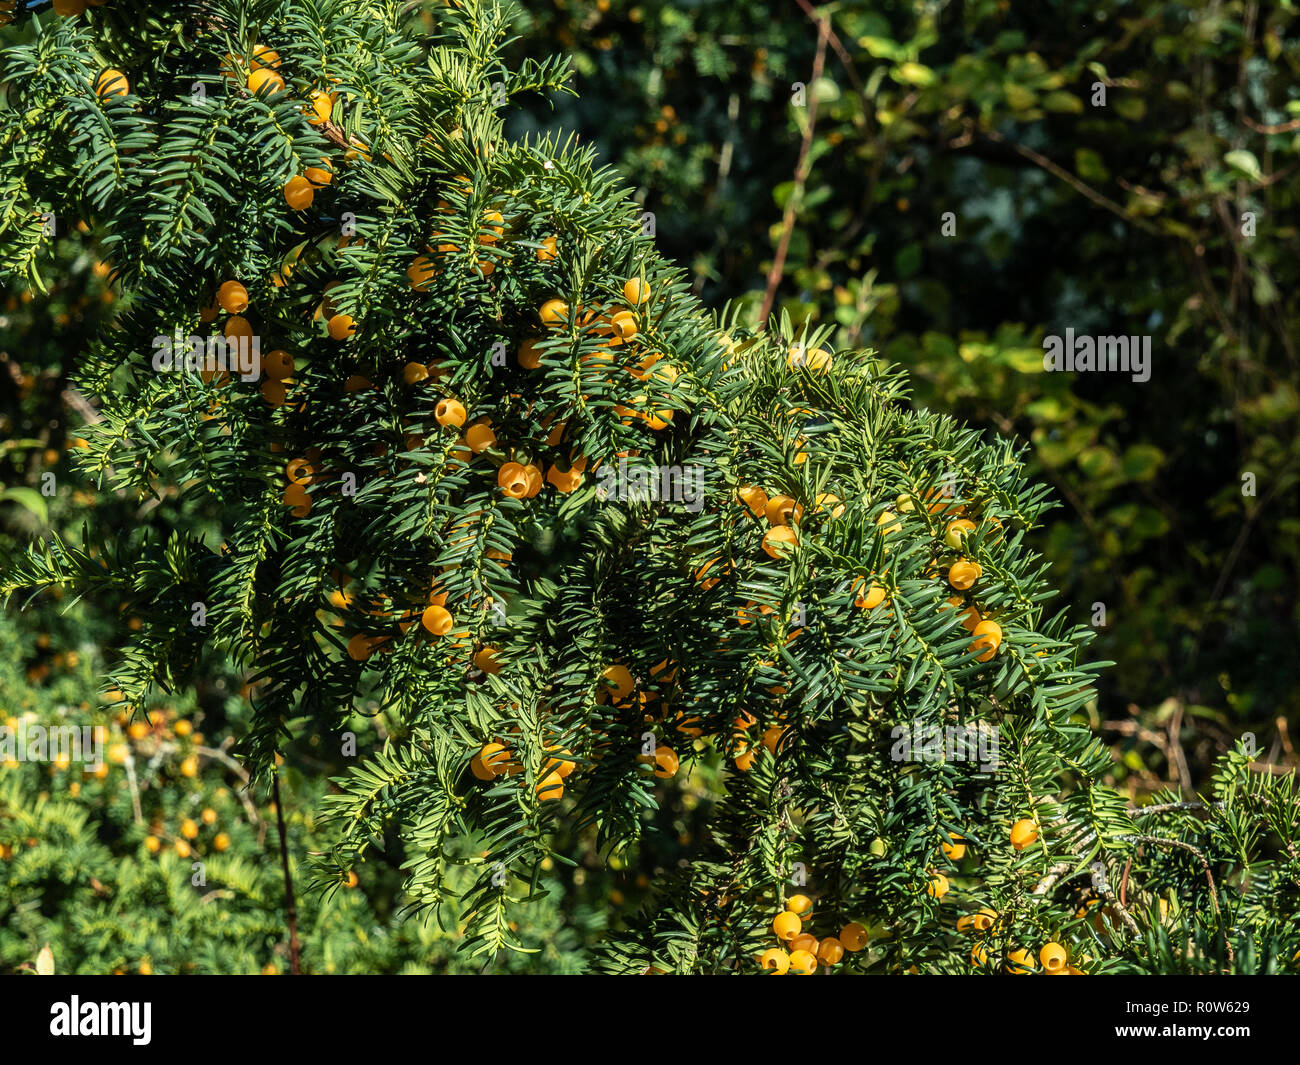 A branch of the yellow berried yew Taxus baccata Lutea Stock Photo